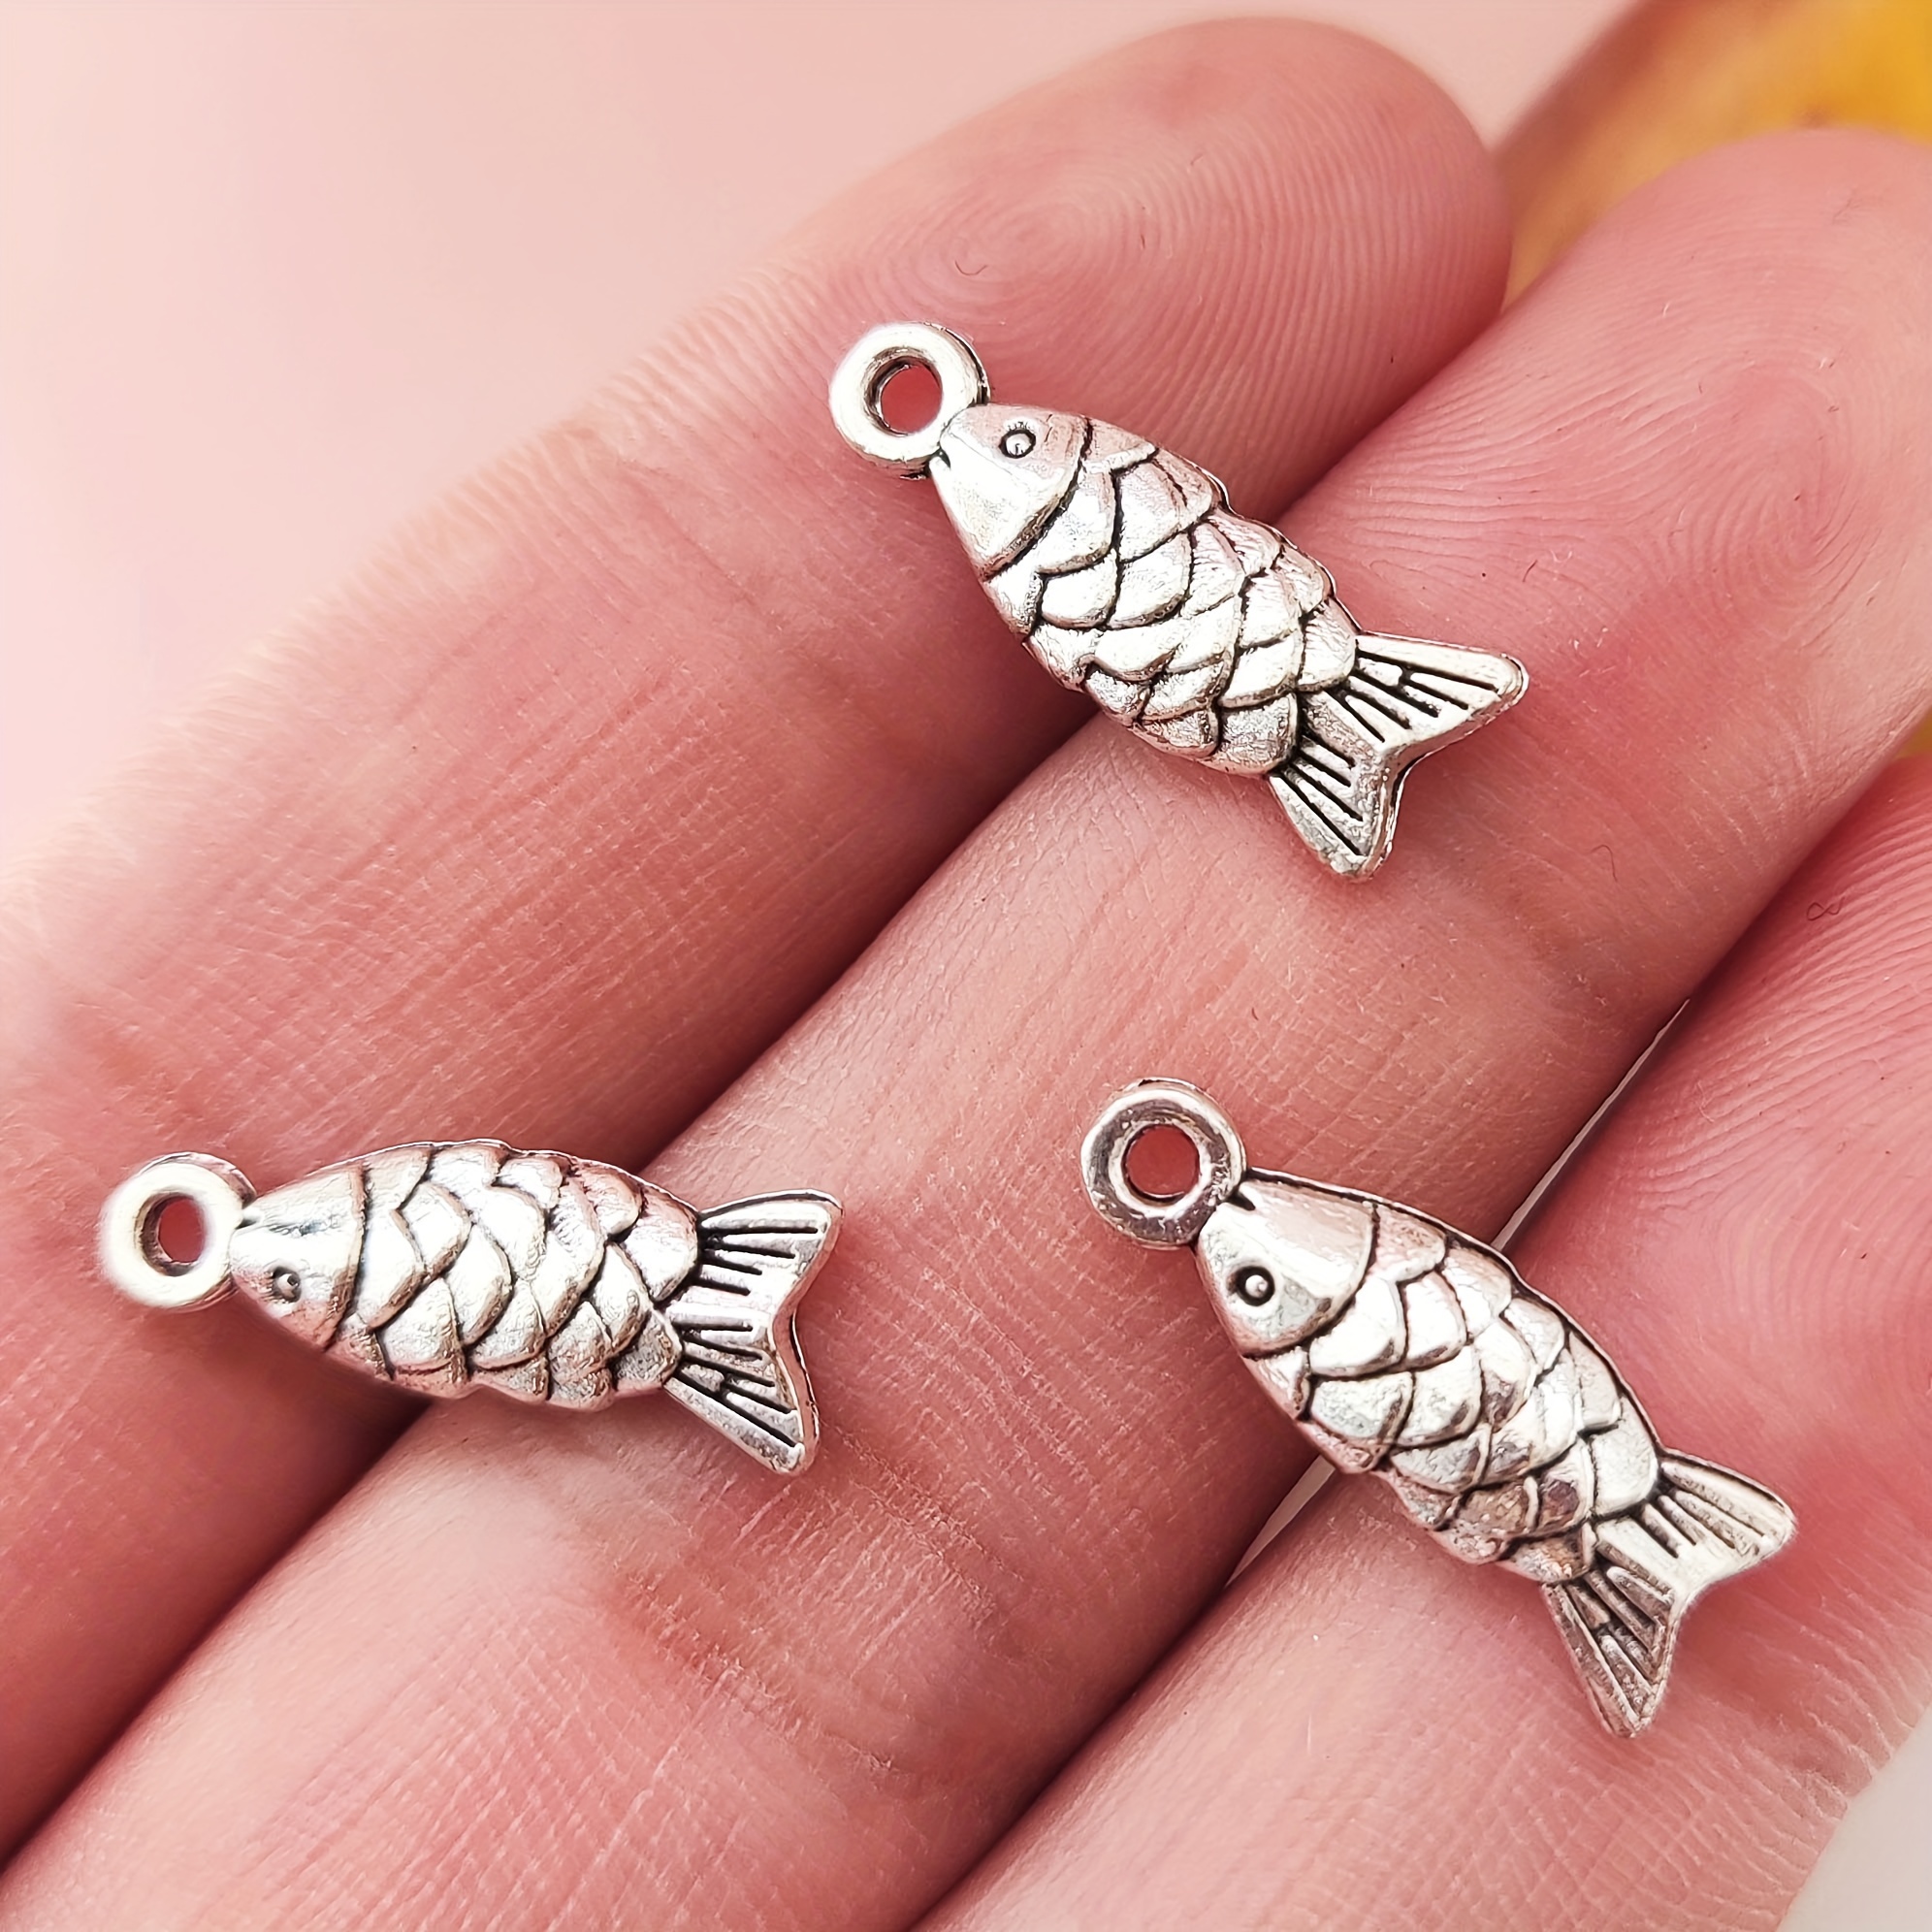 8pcs Antique Silvery Marine Life Small Fish Pendants Vintage Alloy Animal Fish Charms for DIY Necklace Bangle Earrings Key Chain Handbag Jewelry